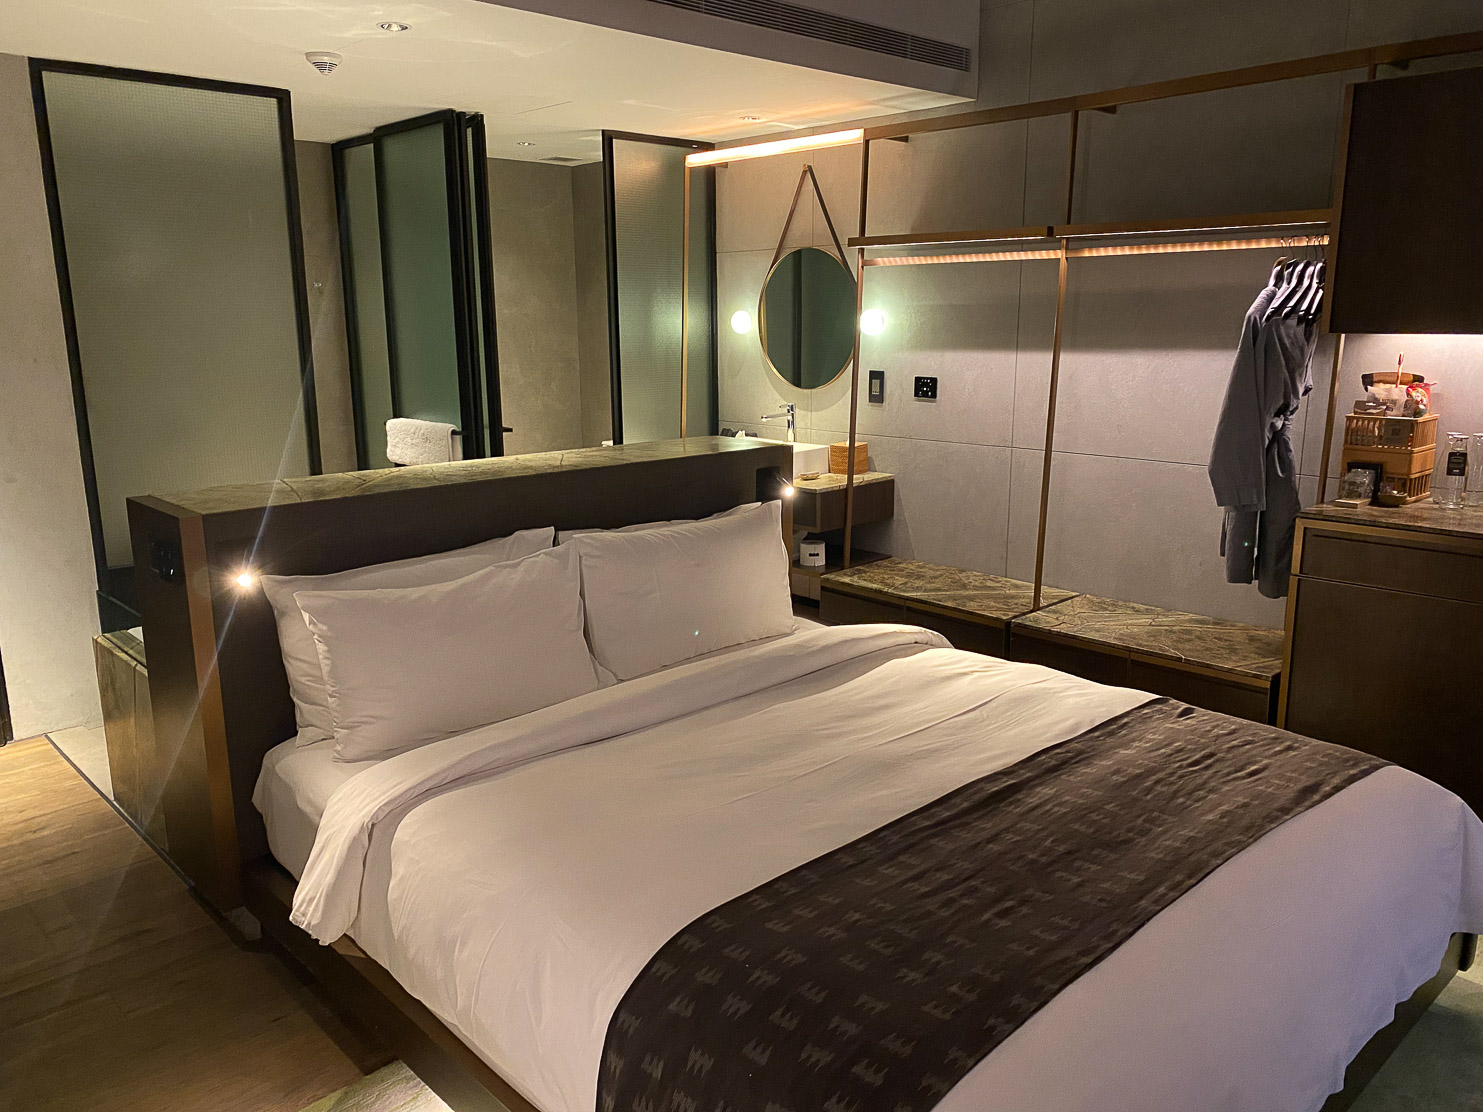 Warehouse Hotel Sleek room and a cozy bed to sink into